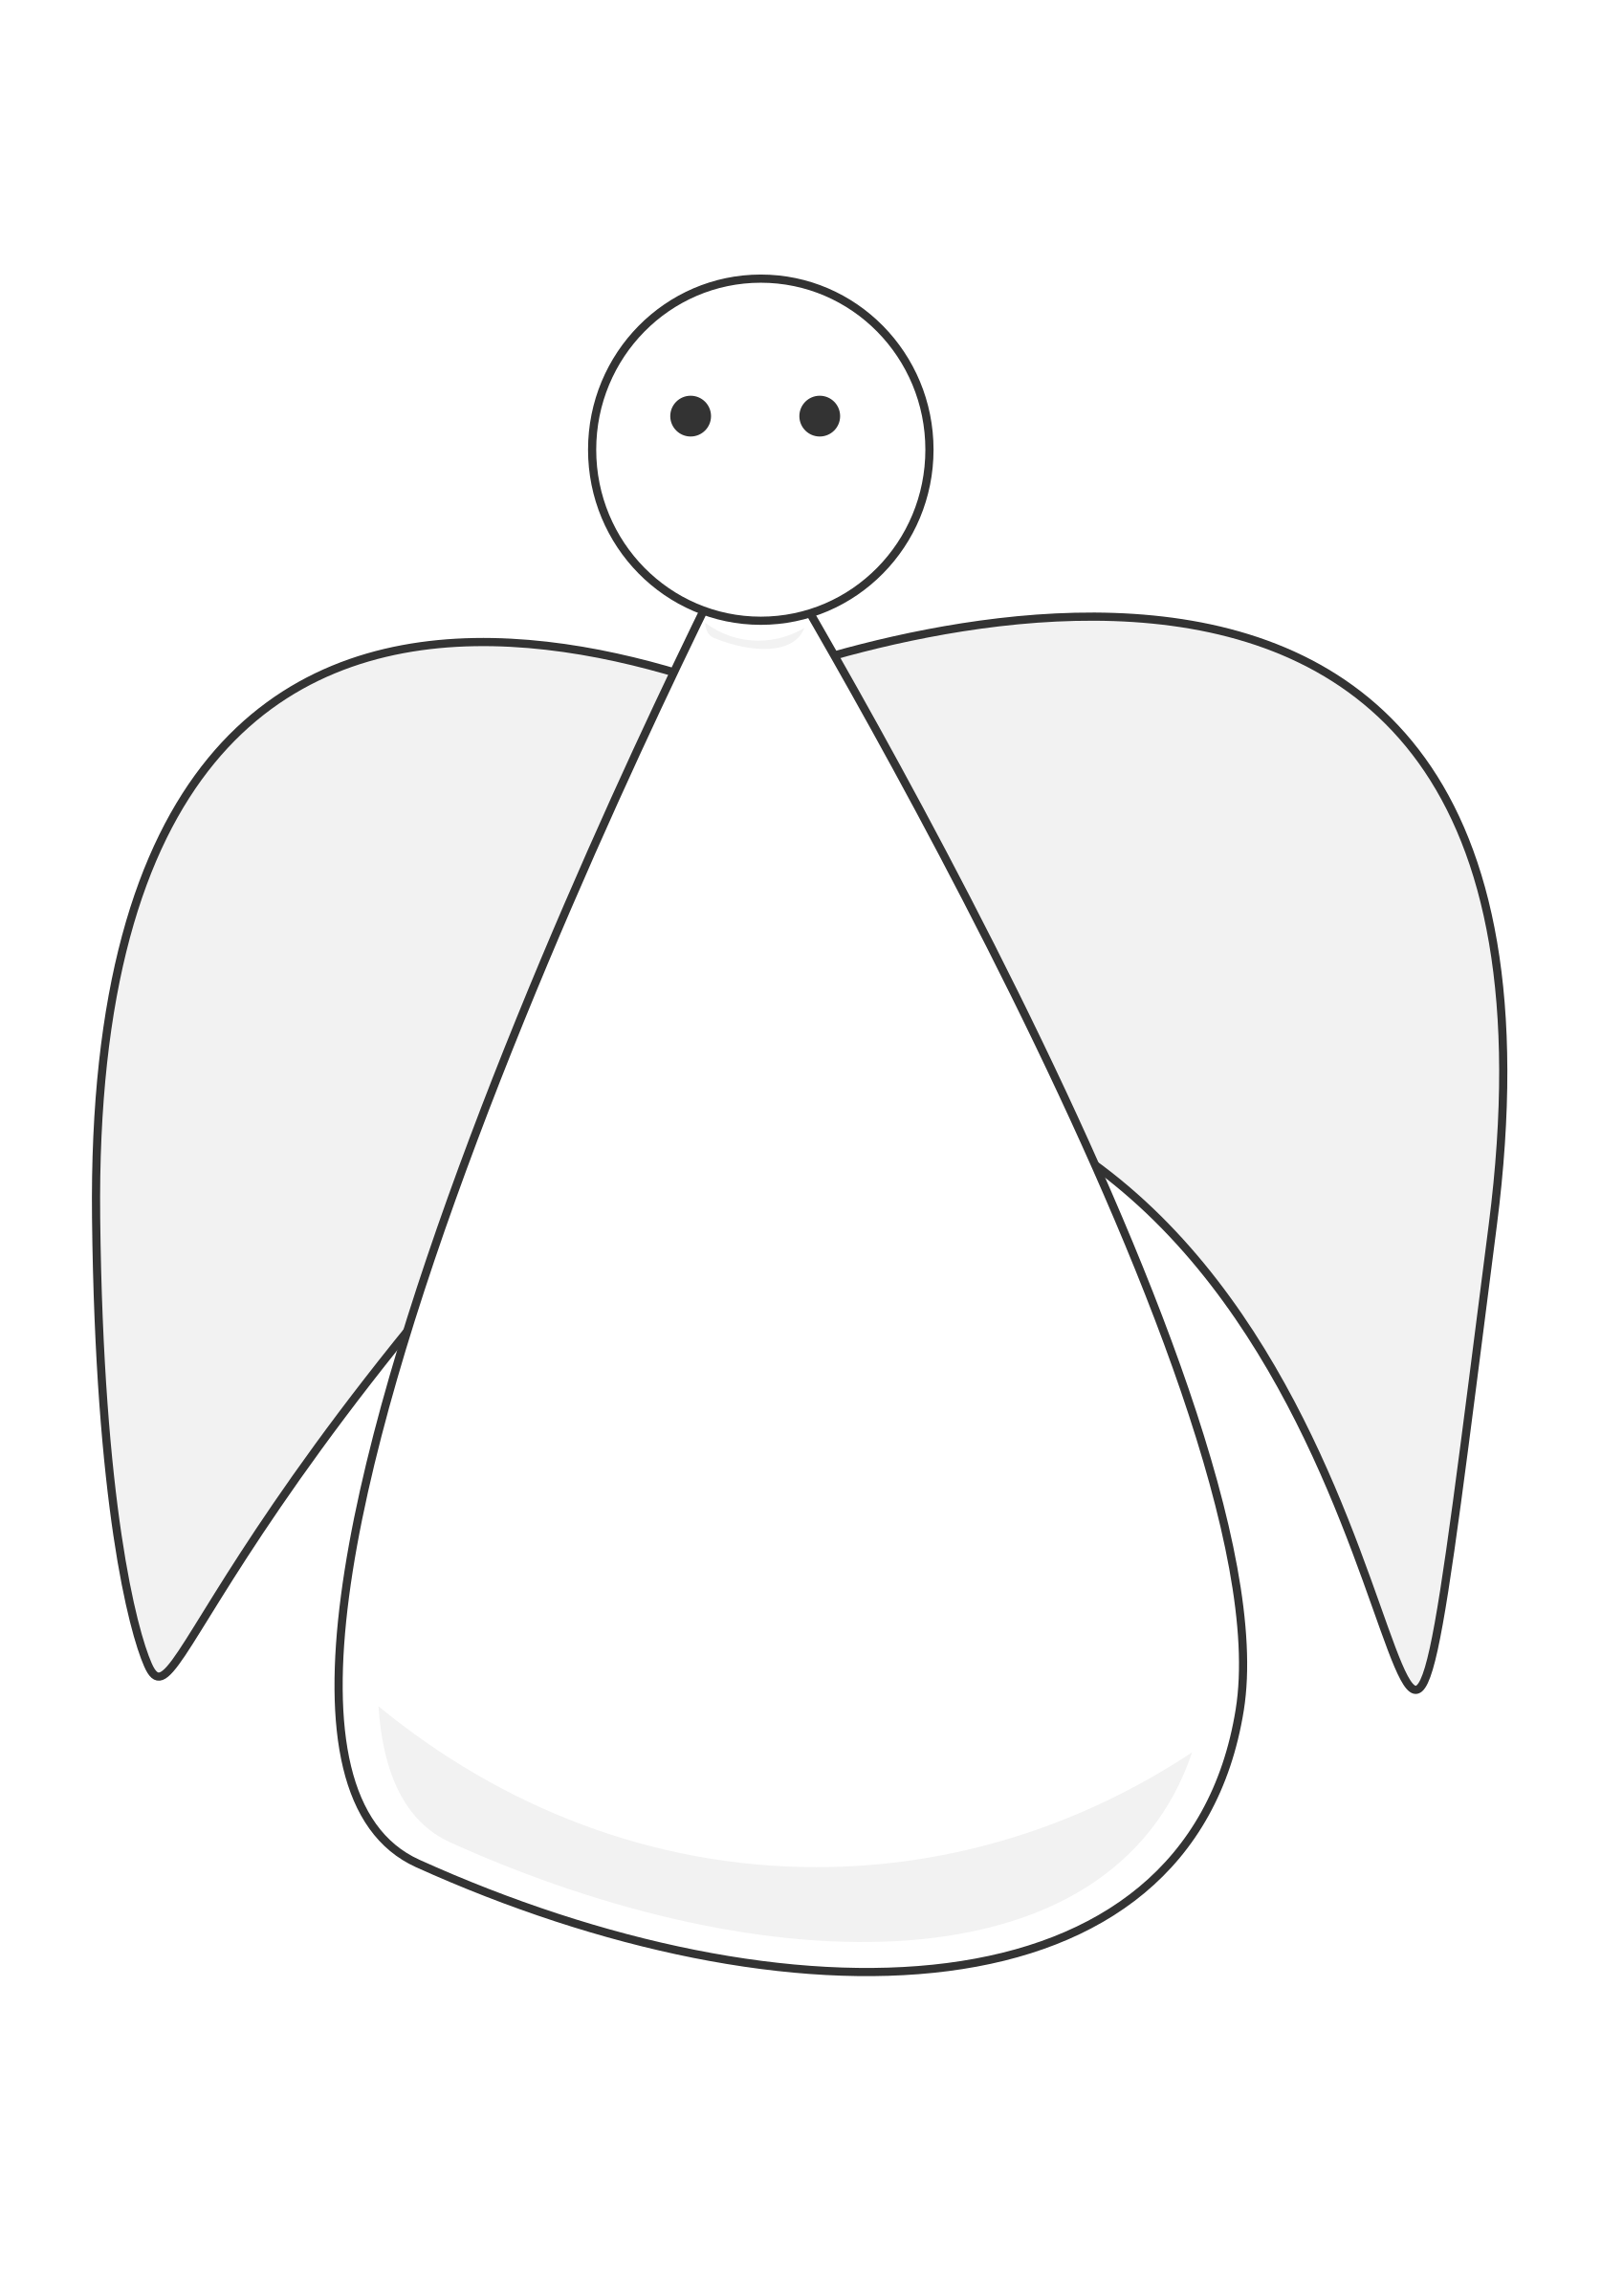 Wing clipart simple. Angel big image png